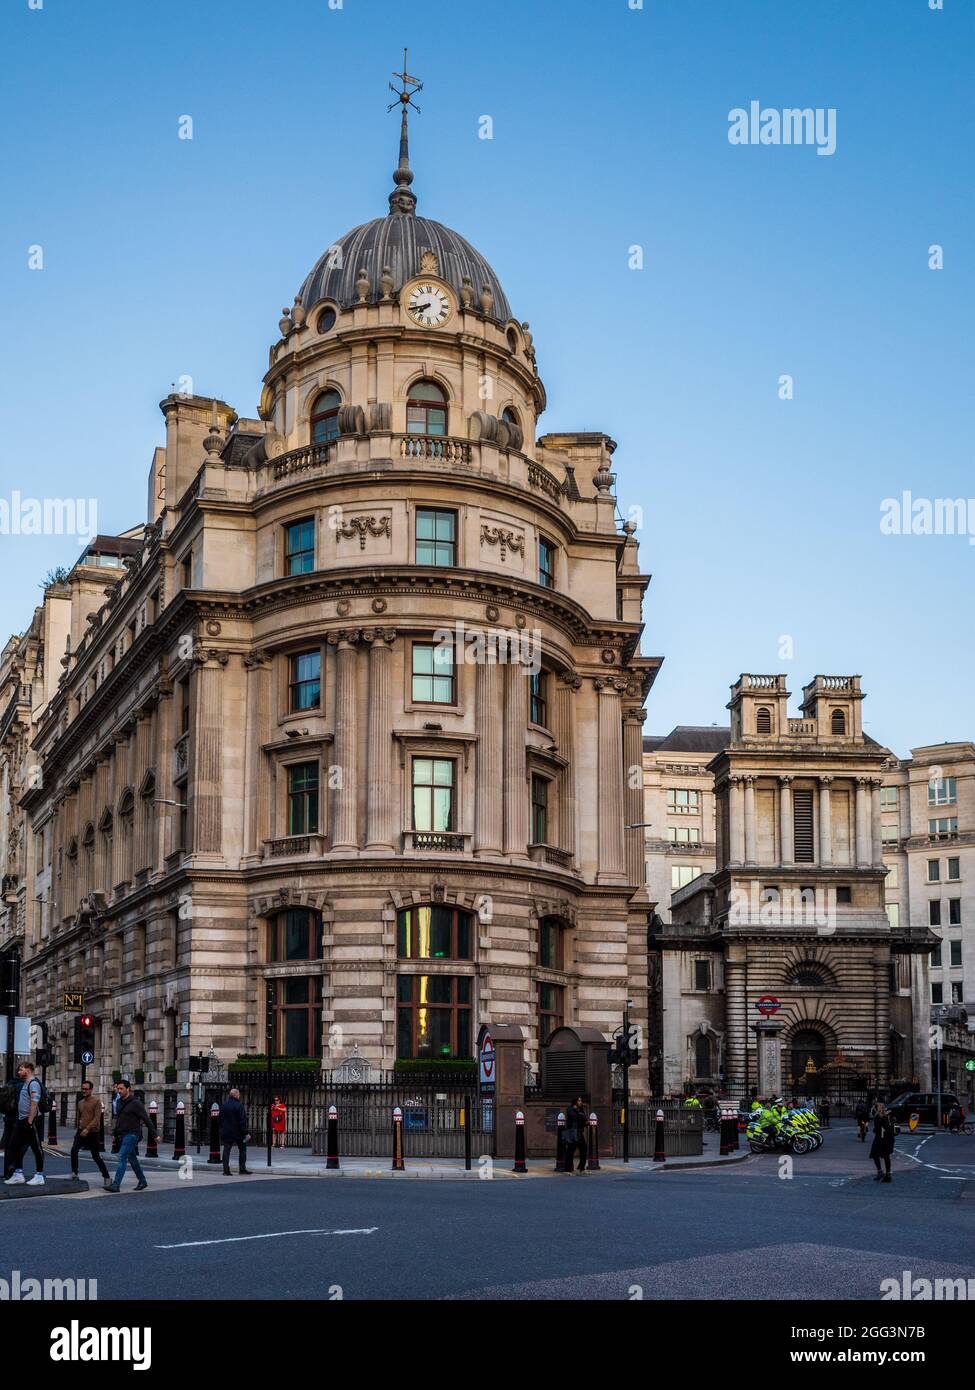 No 1 Cornhill London - No.1 Cornhill in the City of London Financial District - originally built 1903, now refurbished as serviced offices. Grade II. Stock Photo